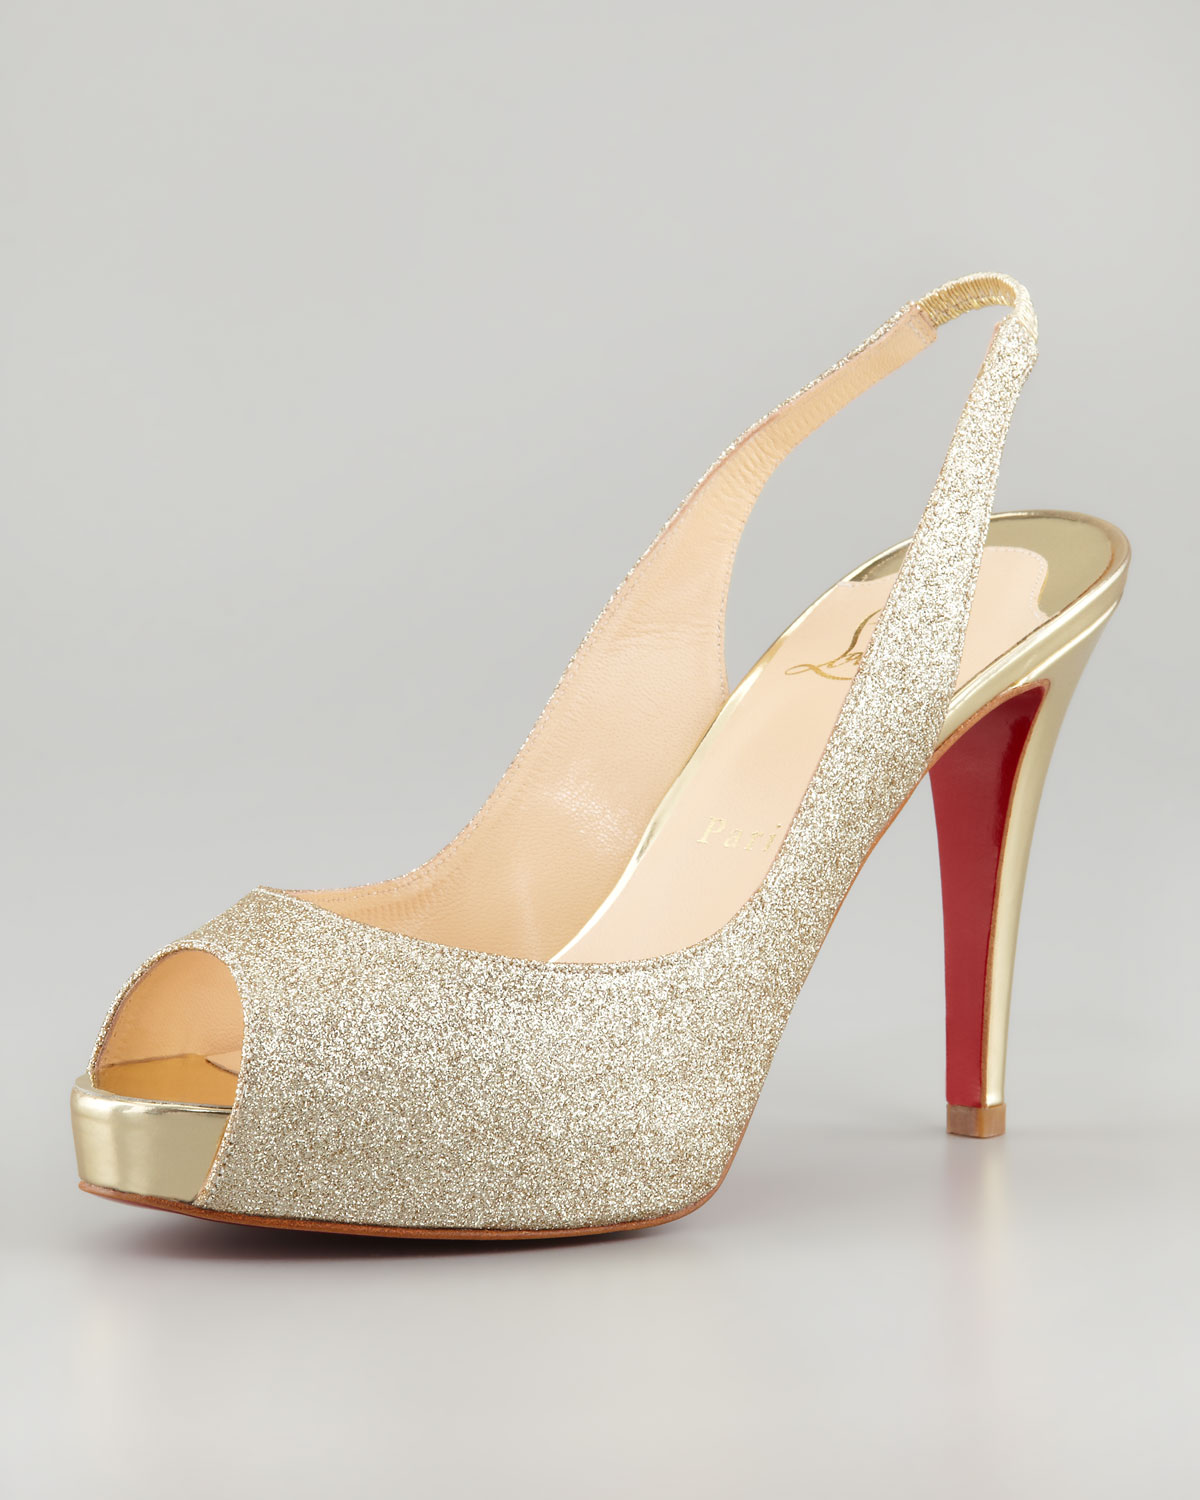 Lyst - Christian Louboutin No Prive Glittered Slingback Red Sole Pump ...